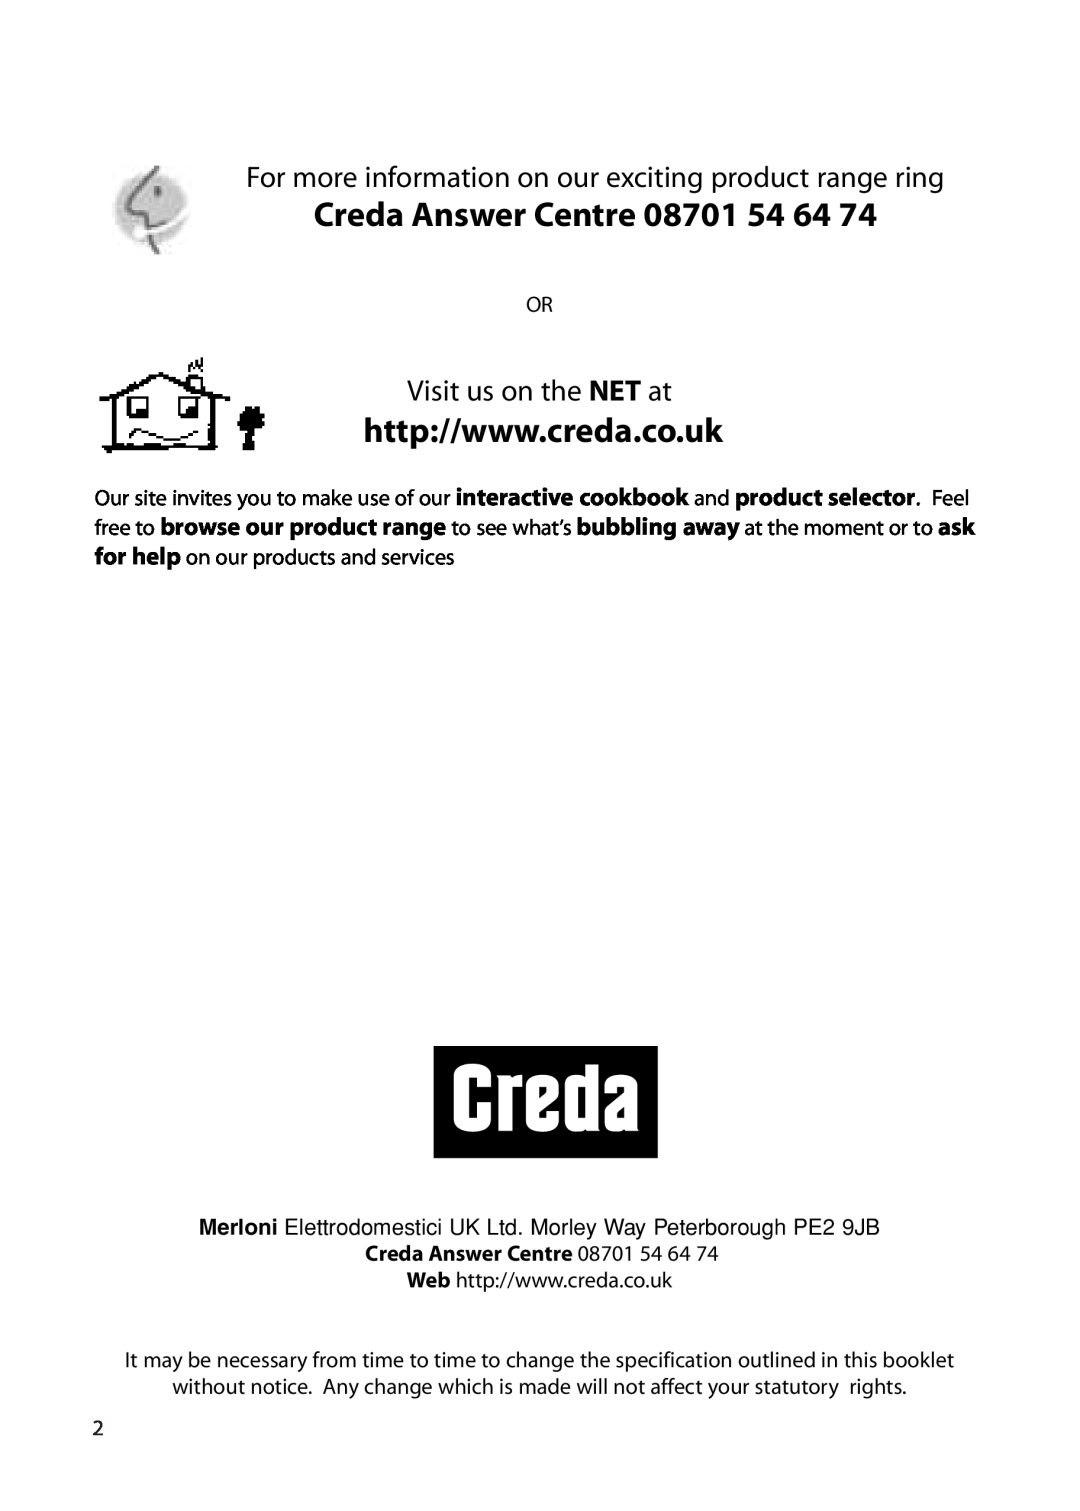 Creda S230G installation instructions Creda Answer Centre 08701, Visit us on the NET at 